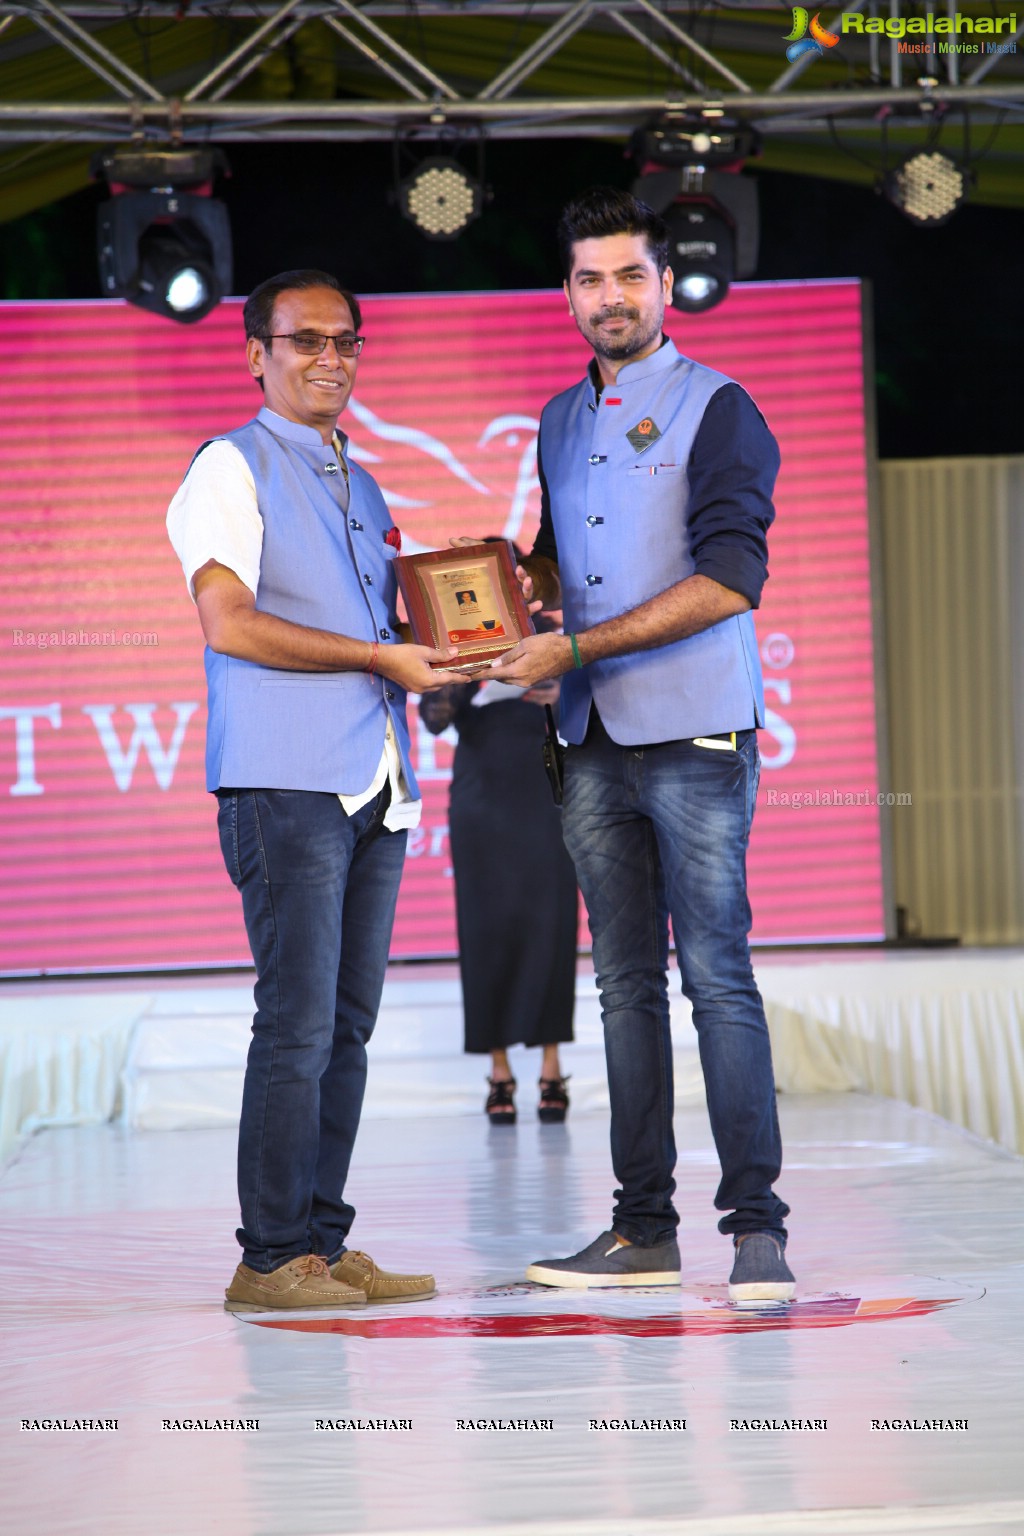 GMWA Fashion Show 2017 at Classic Gardens, Secunderabad